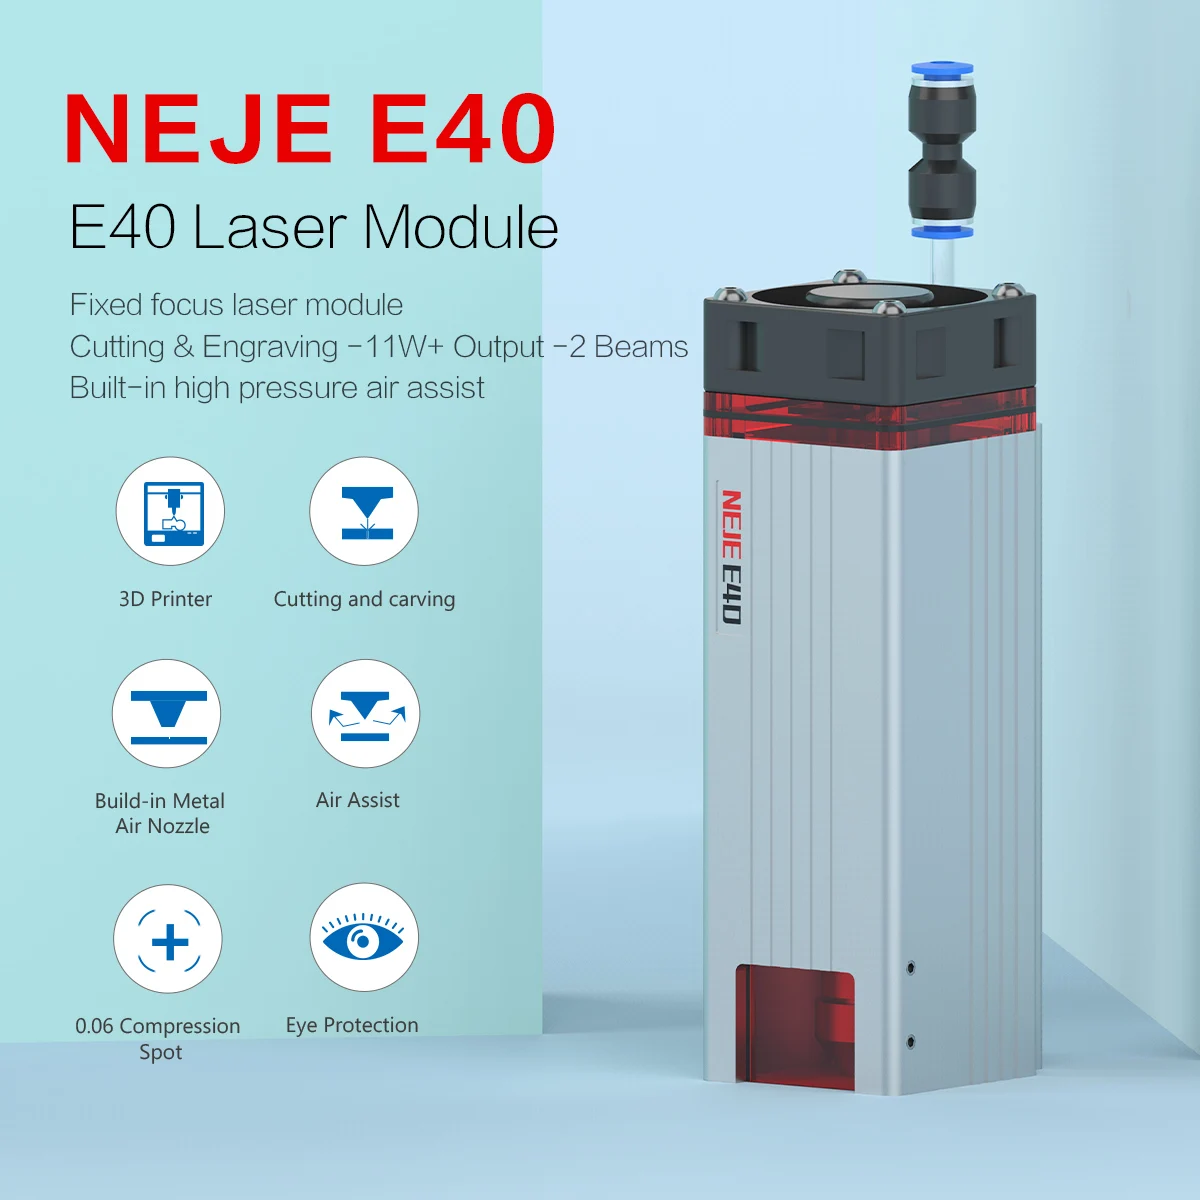 NEJE E40 Laser Engraver 11W+ OUTPUT Fixed-Focus Laser Module For CUTTING and CARVING 2 BEAM BUILT-IN HIGH PRESSURE AIR ASSIST